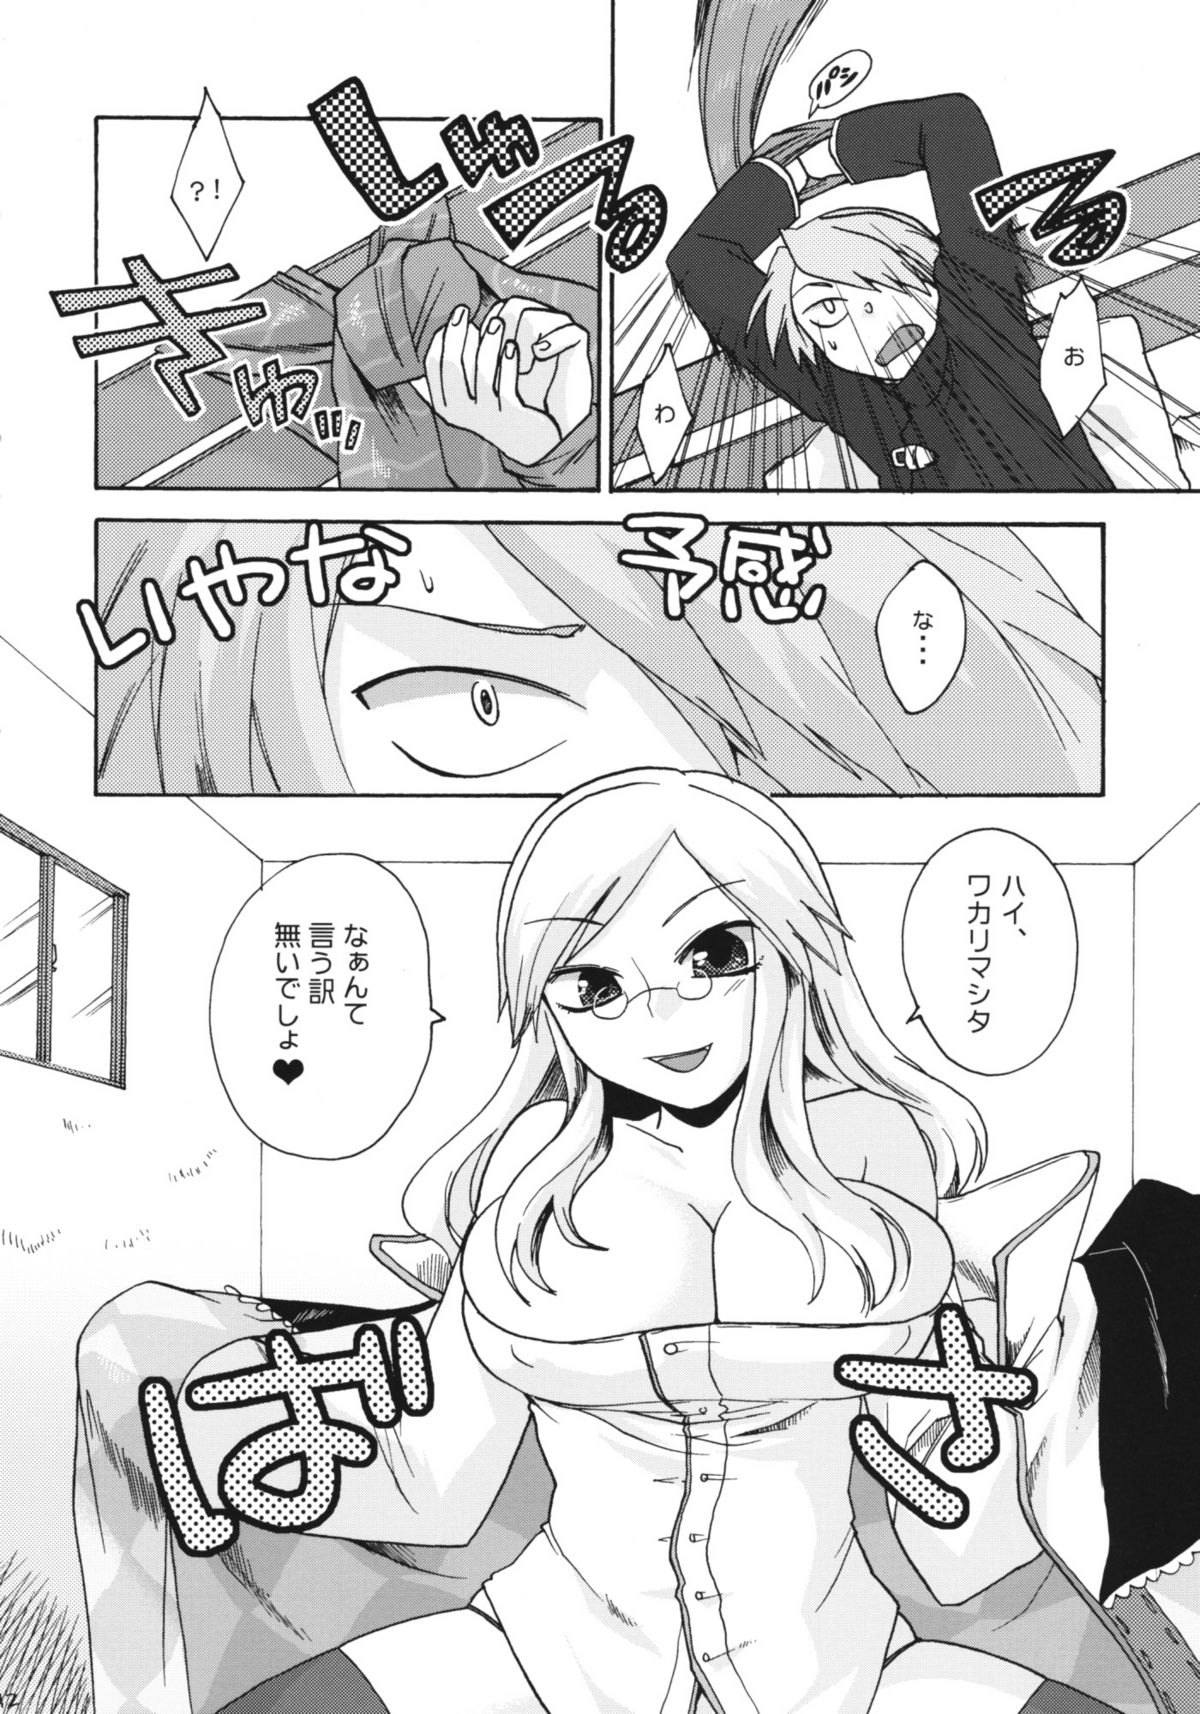 (ComiComi13) [Trip Spider (niwacho)] In You And Me (7th DRAGON) page 11 full